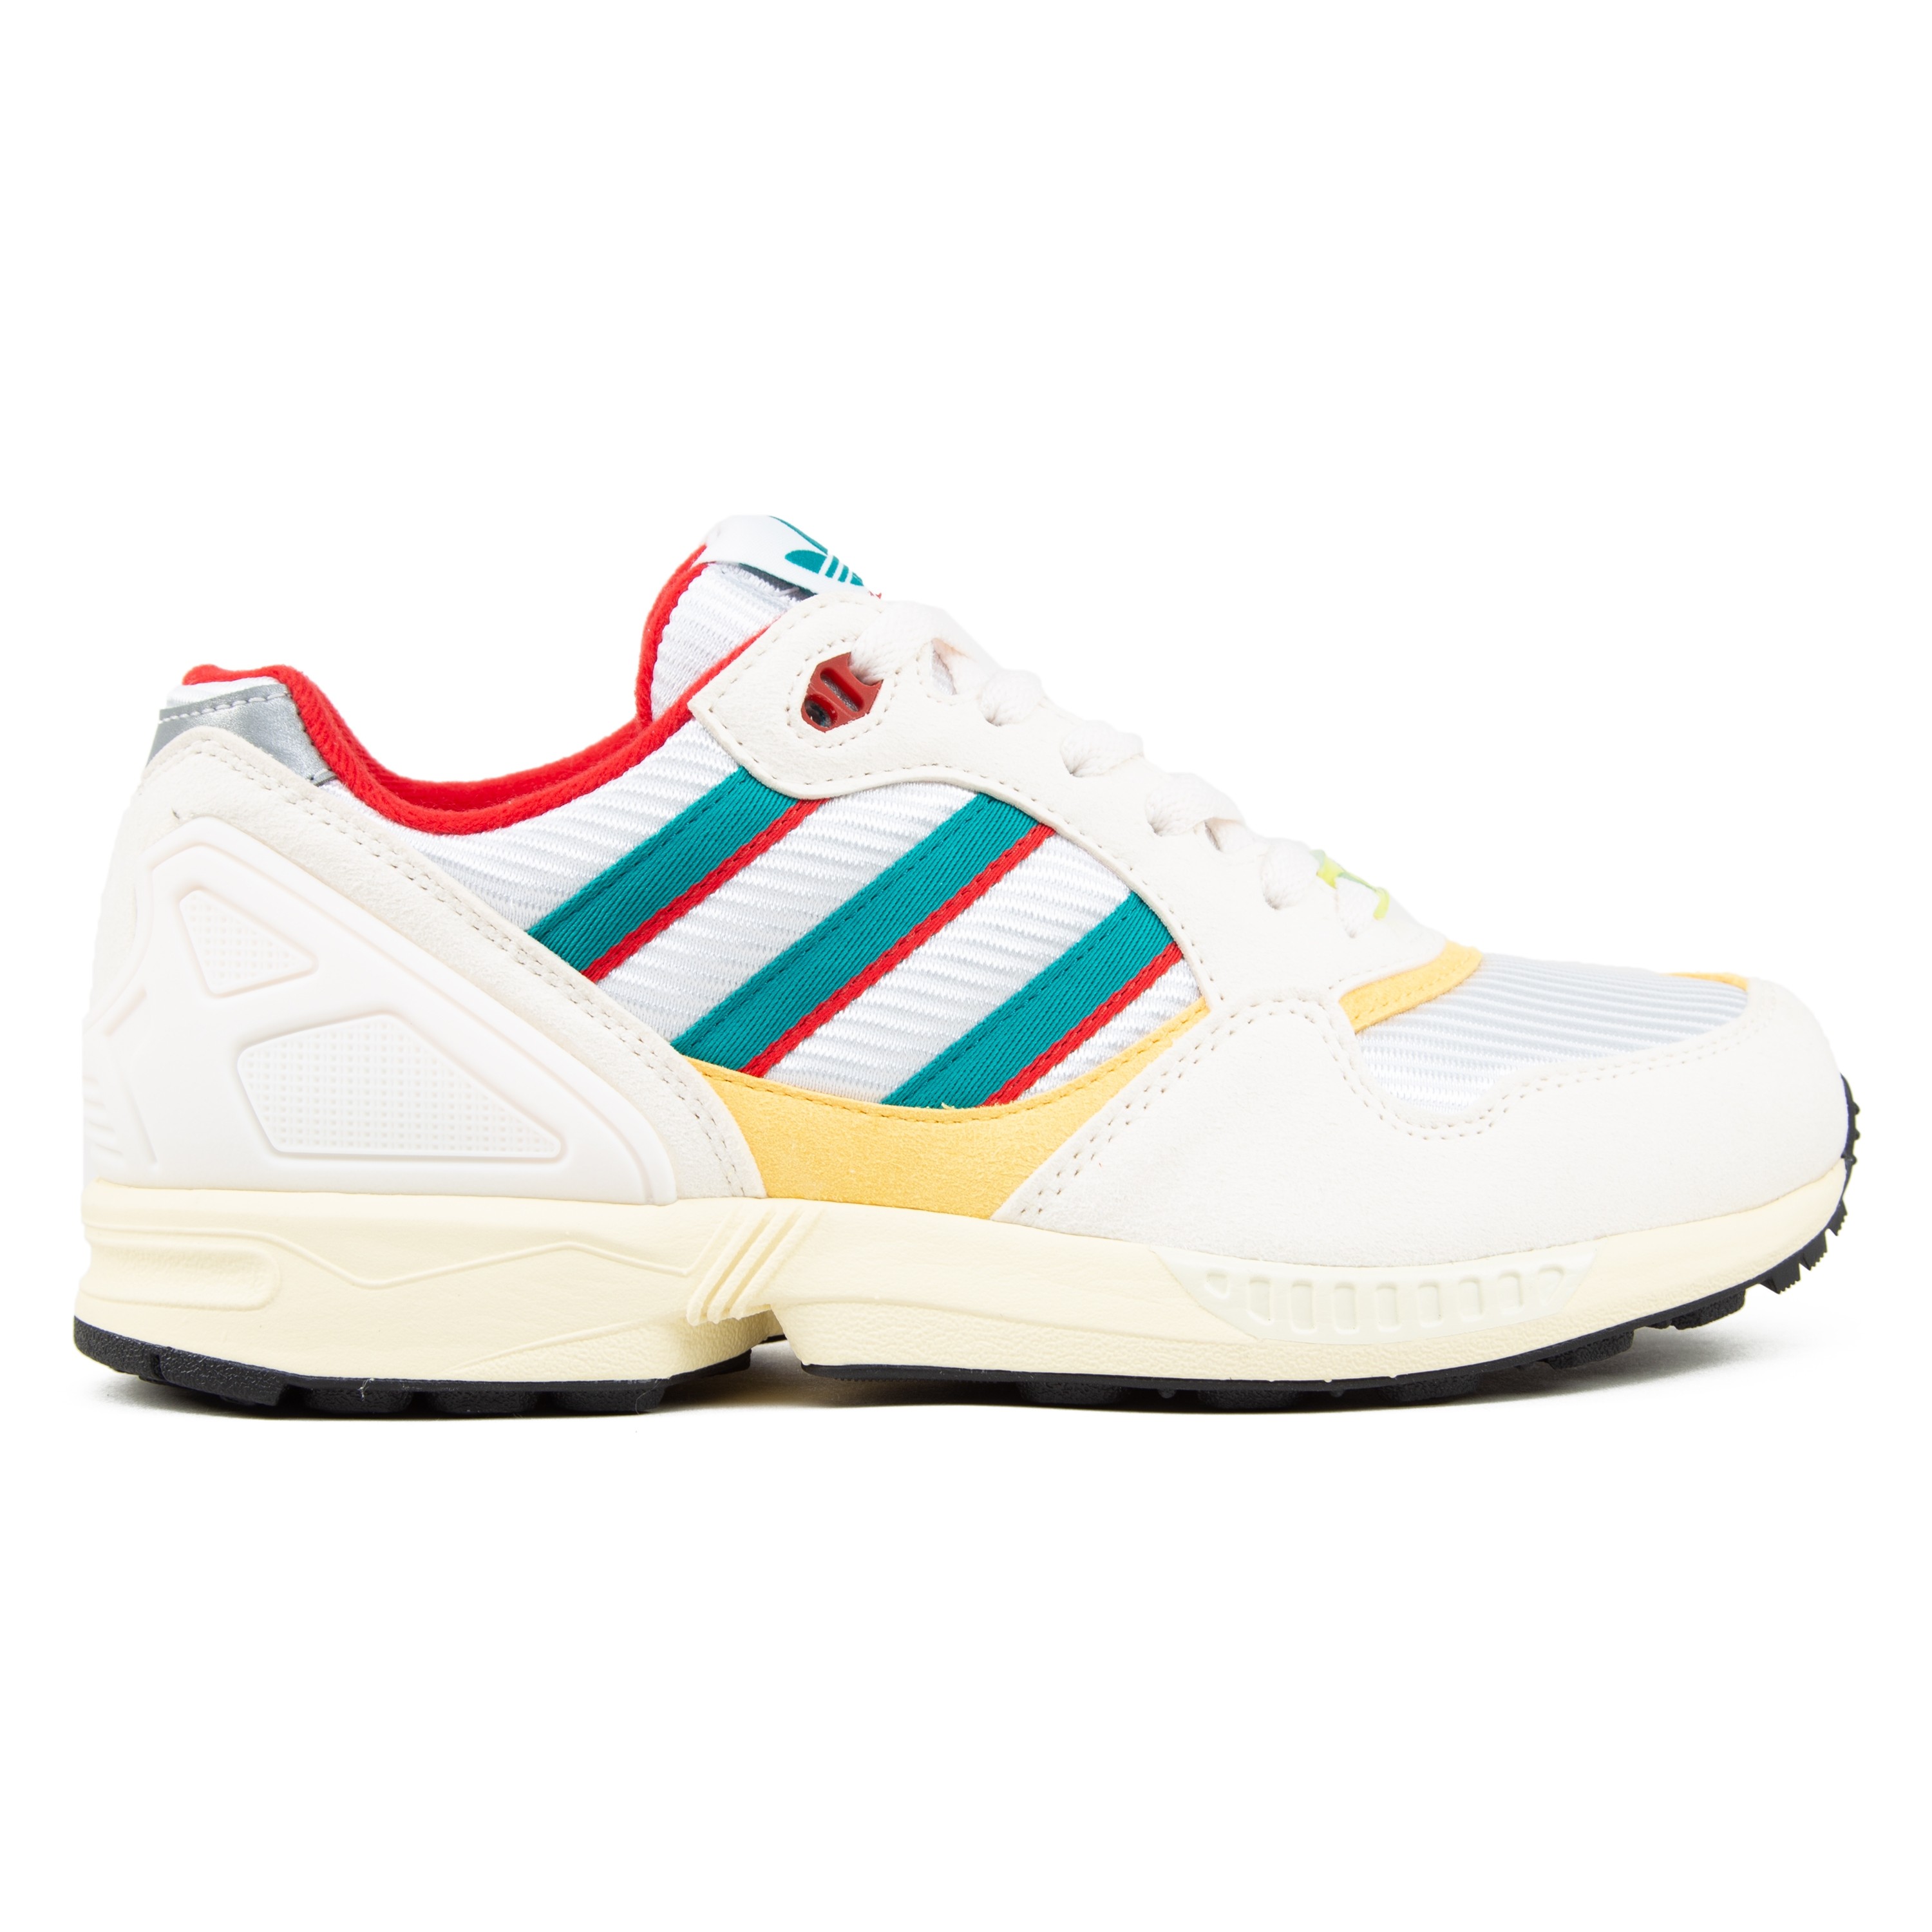 adidas ZX 6000 OG S '30 Years of Torsion' (Cream White/Scarlet 